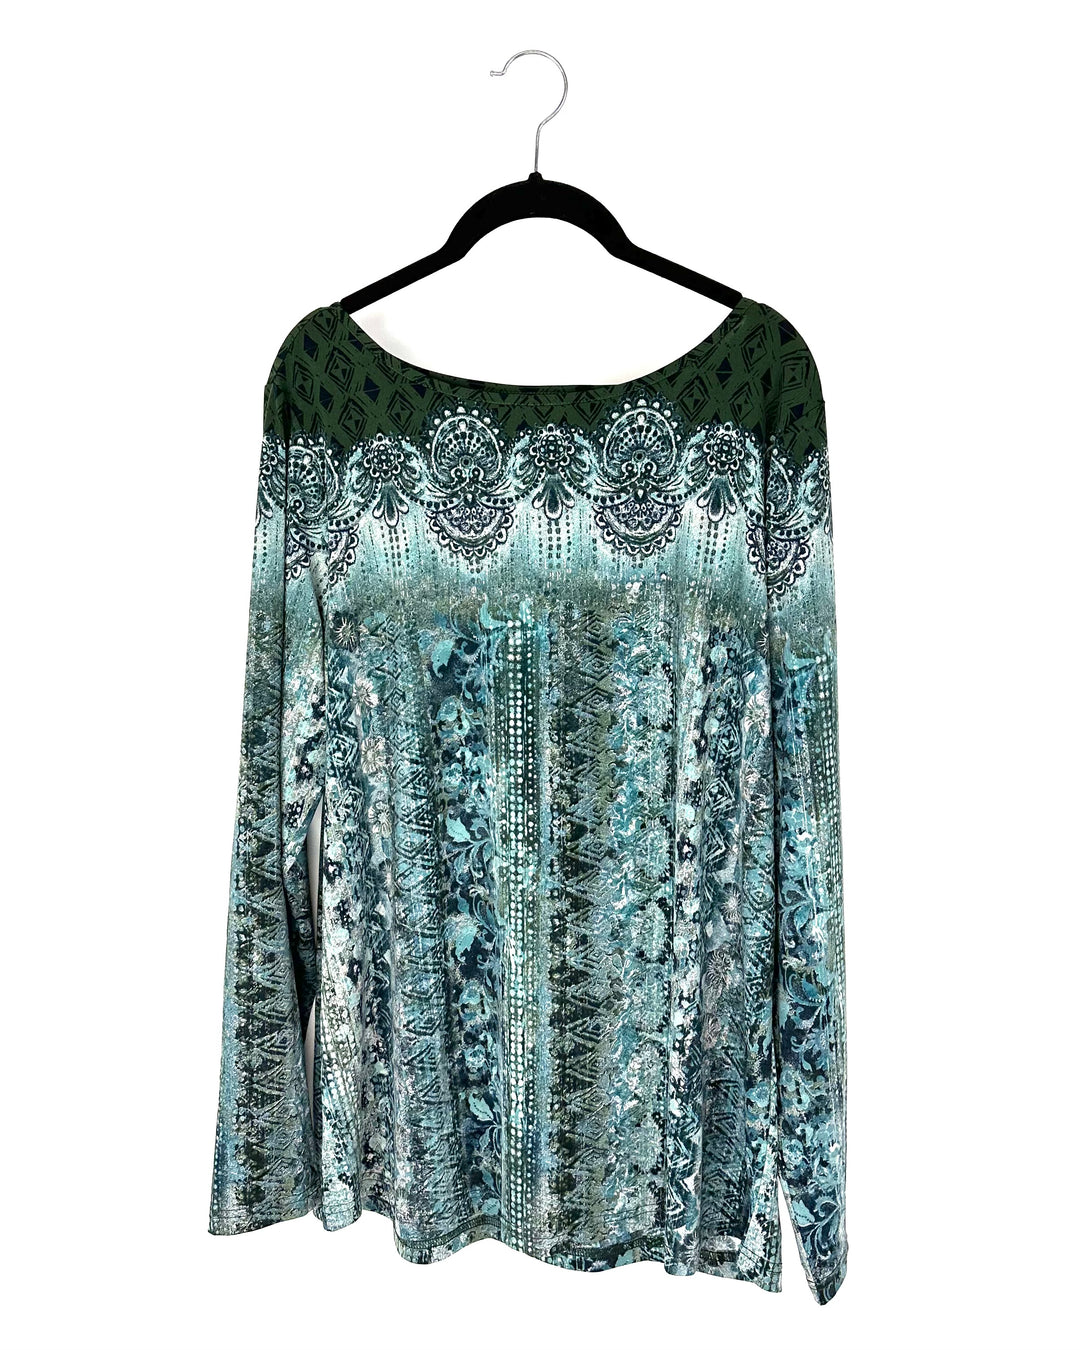 Teal And Green Abstract Print Long Sleeve Shirt - Size 14-16